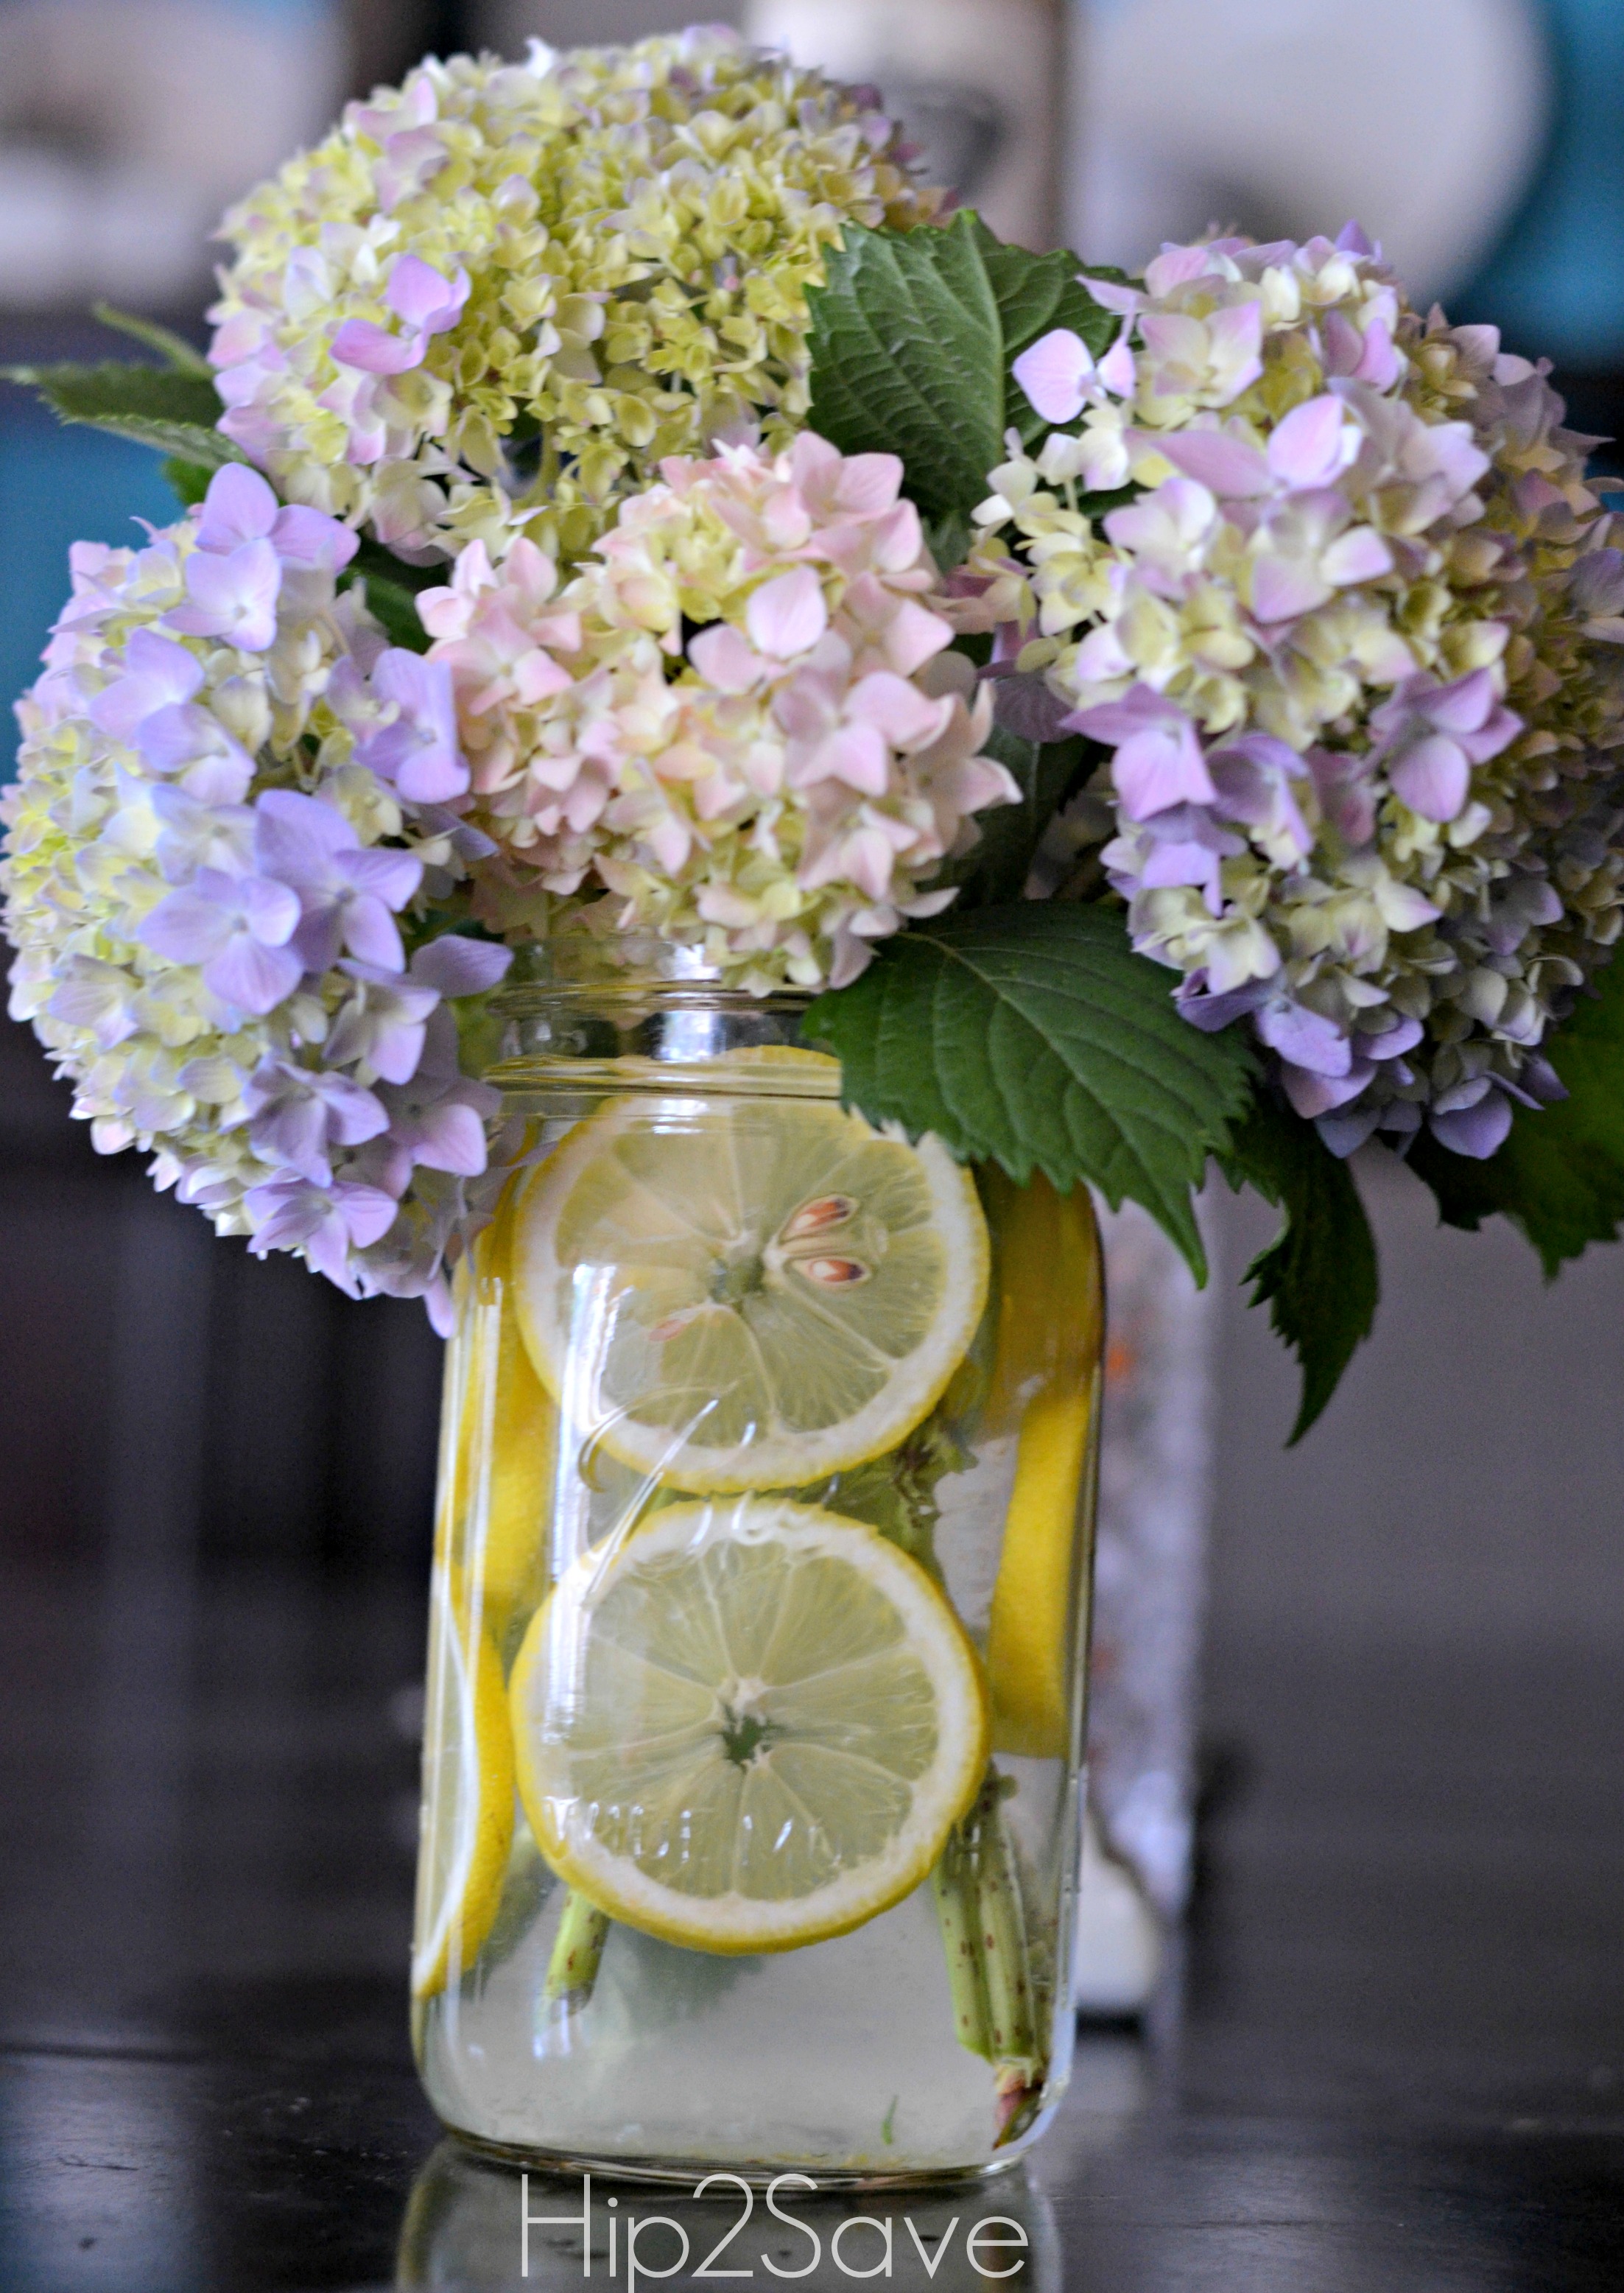 https://hip2save.com/wp-content/uploads/2014/02/lemons-and-flowers-in-a-mason-jar-hip2save.jpg?strip=all